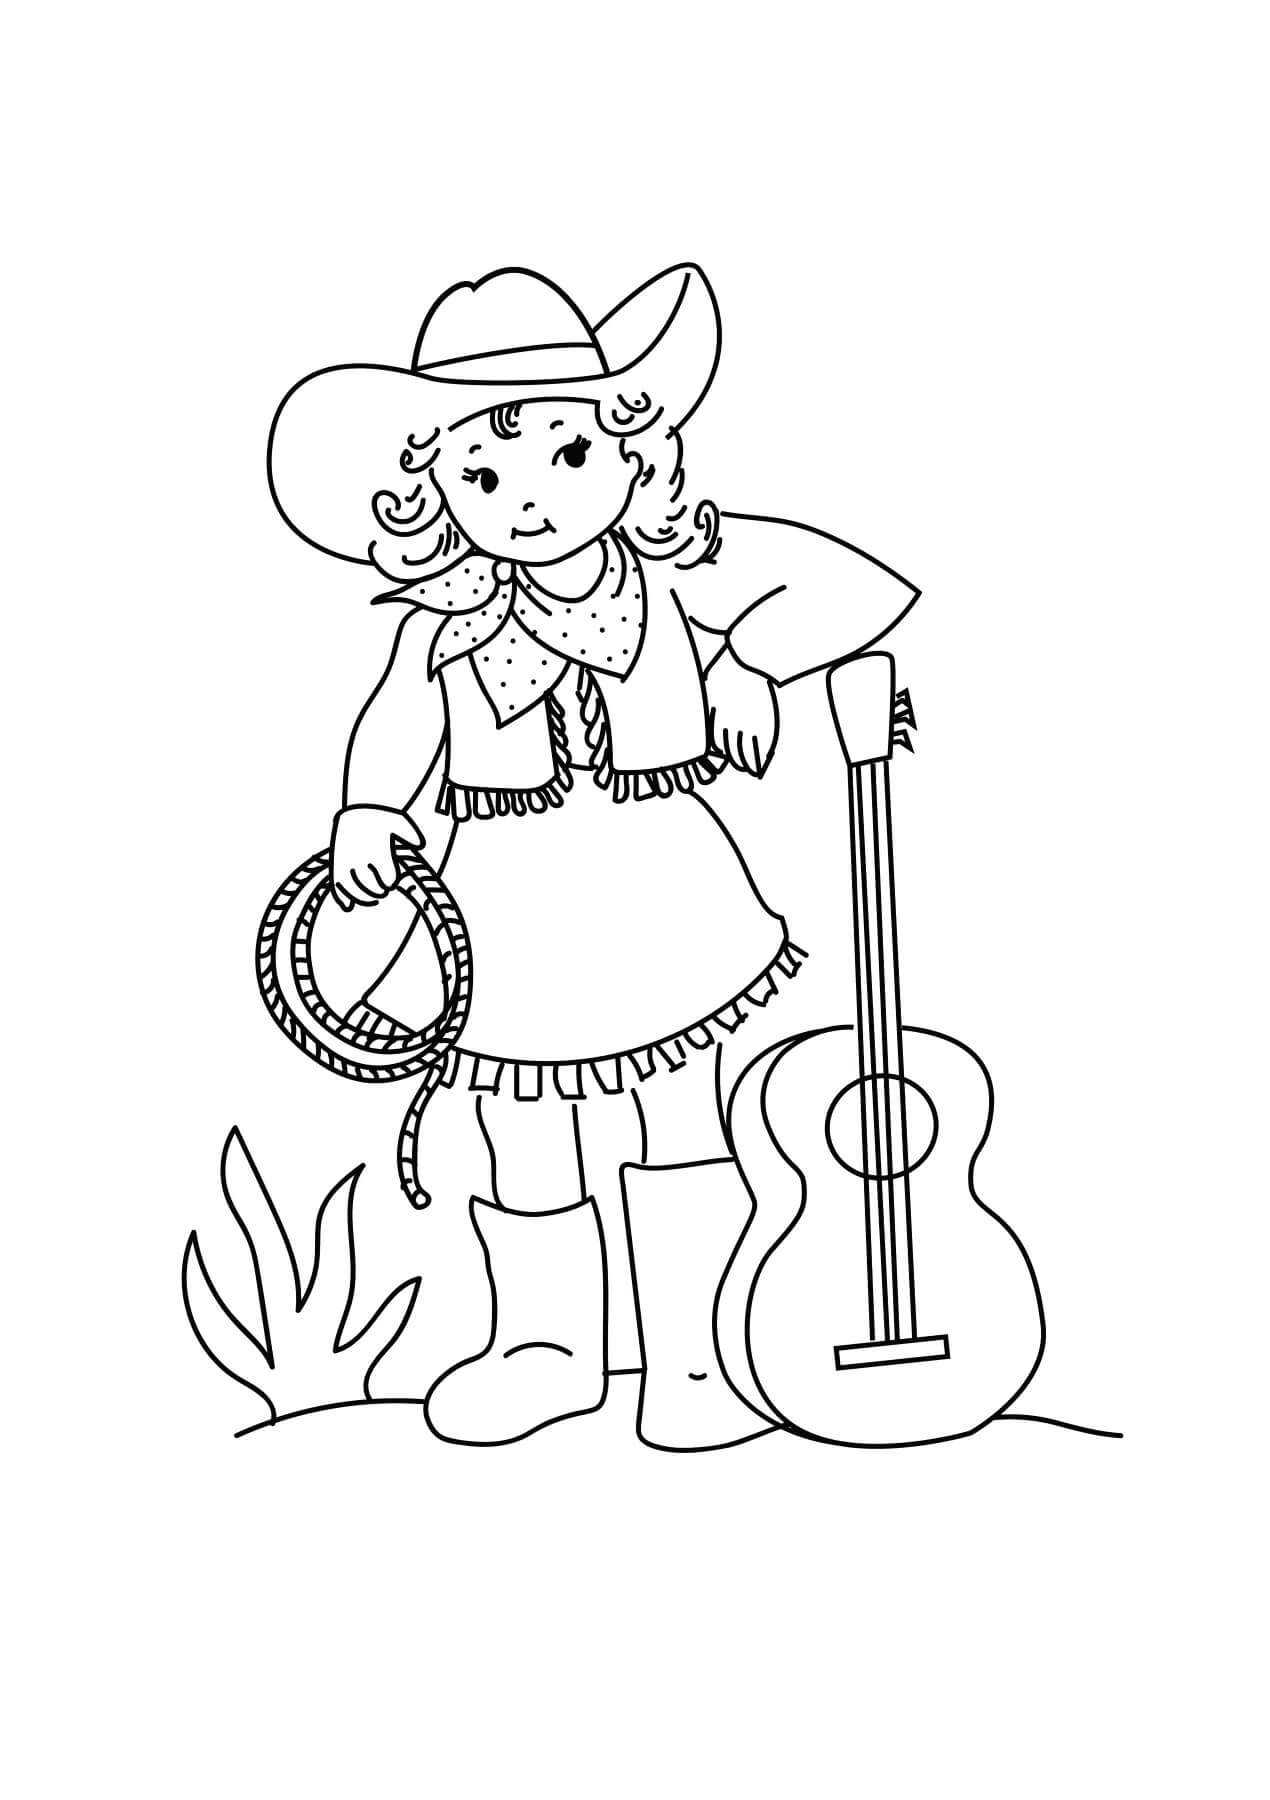 Cow-girl avec Guitare coloring page